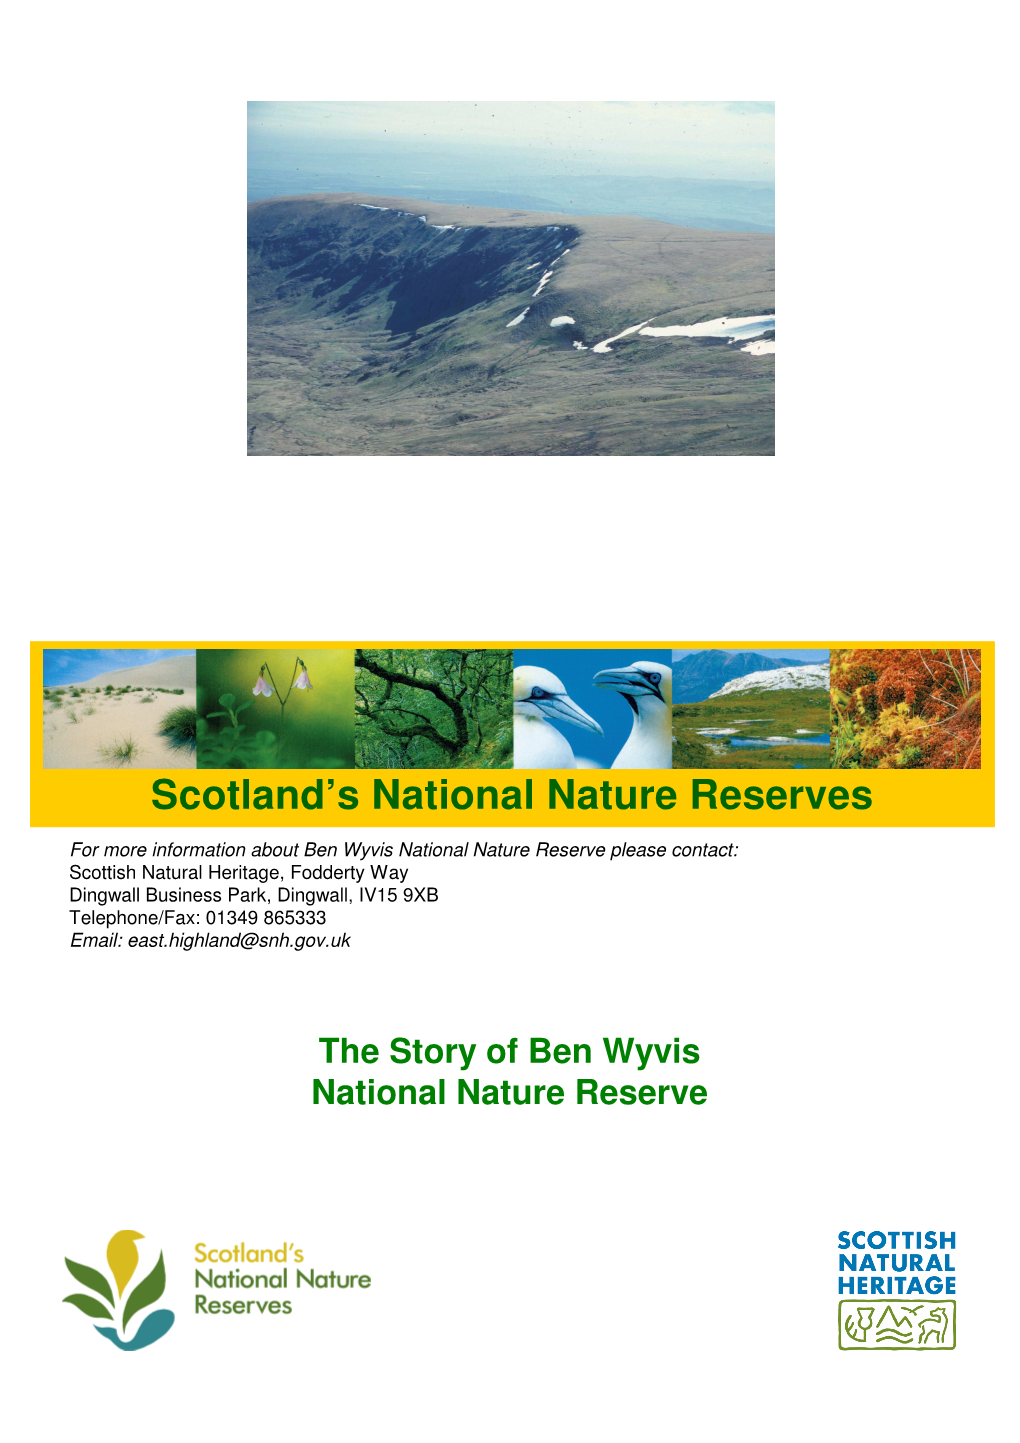 The Story of Ben Wyvis National Nature Reserve